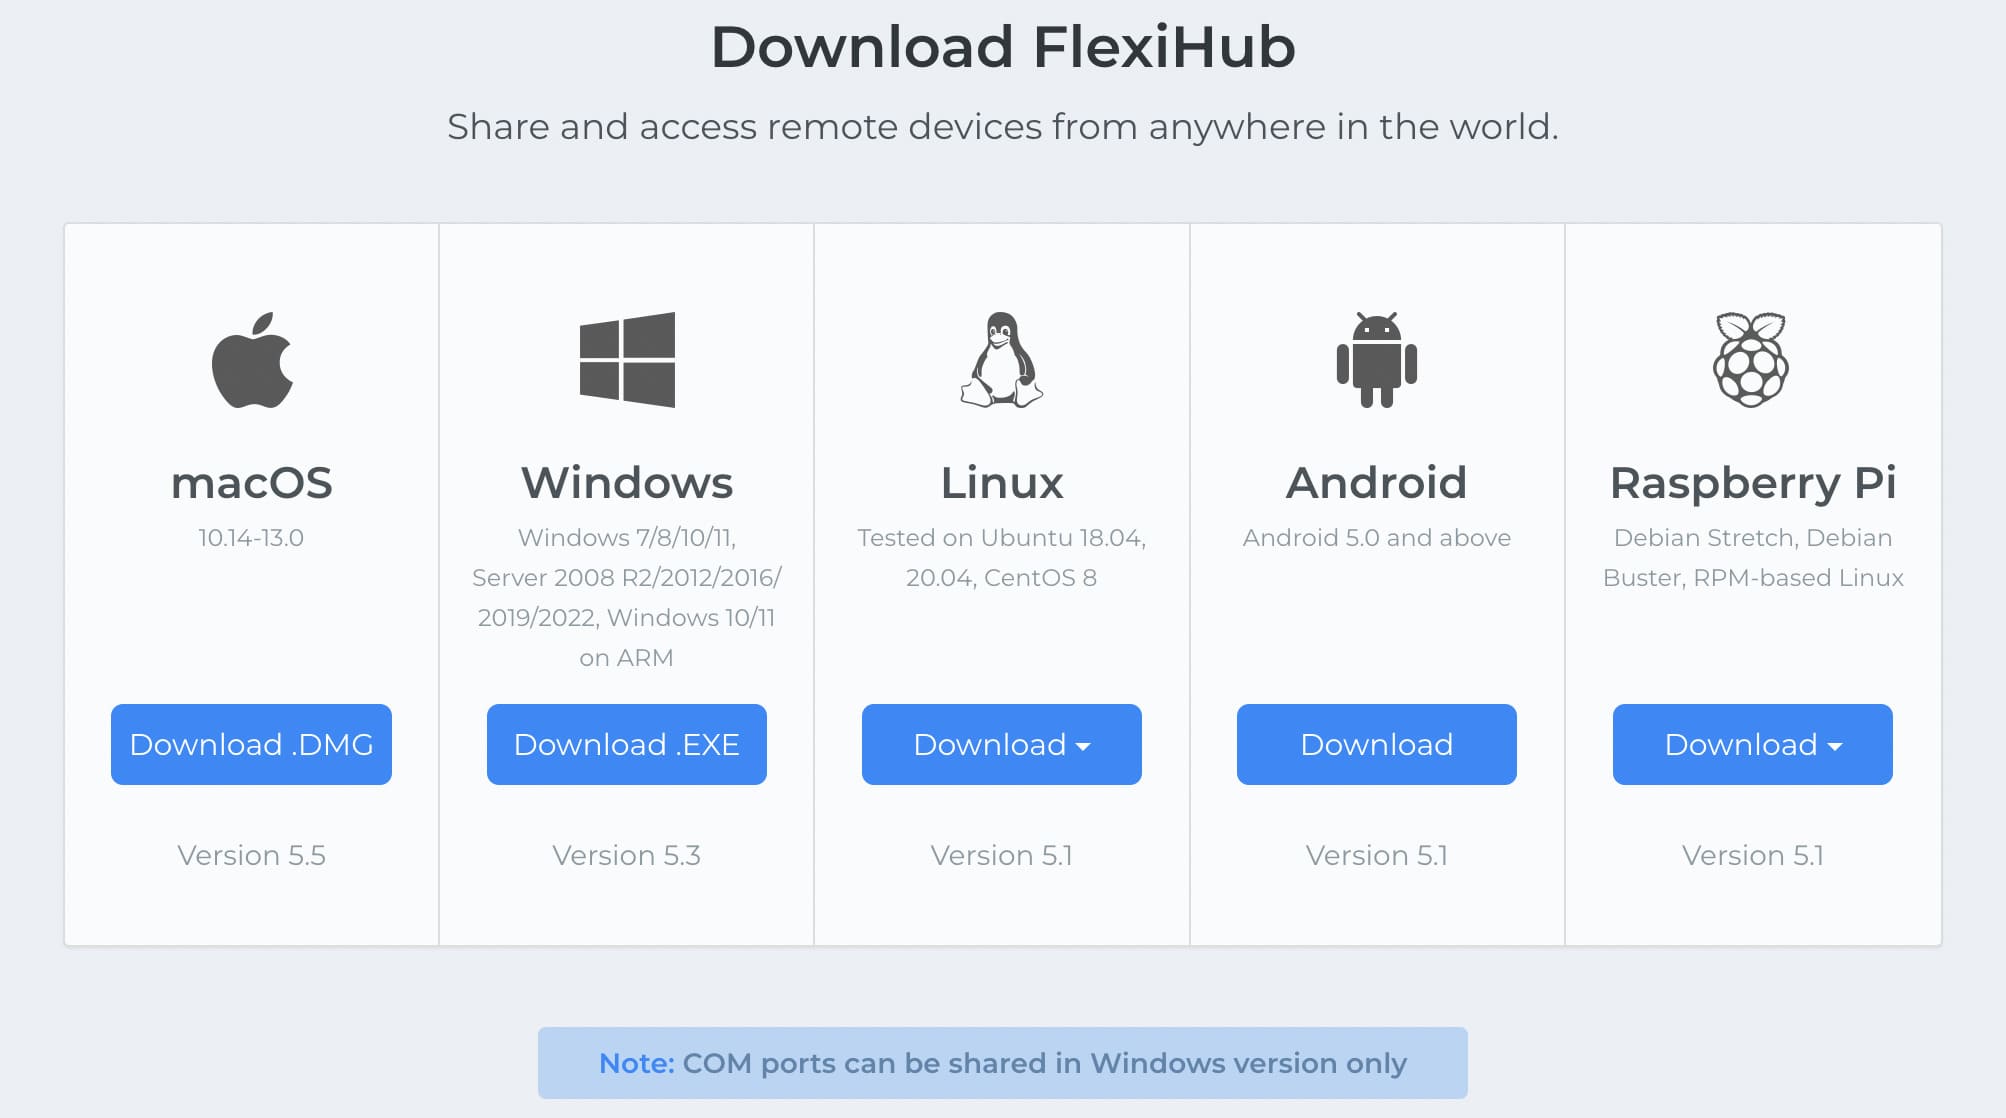 Install FlexiHub on the computer that will be the server